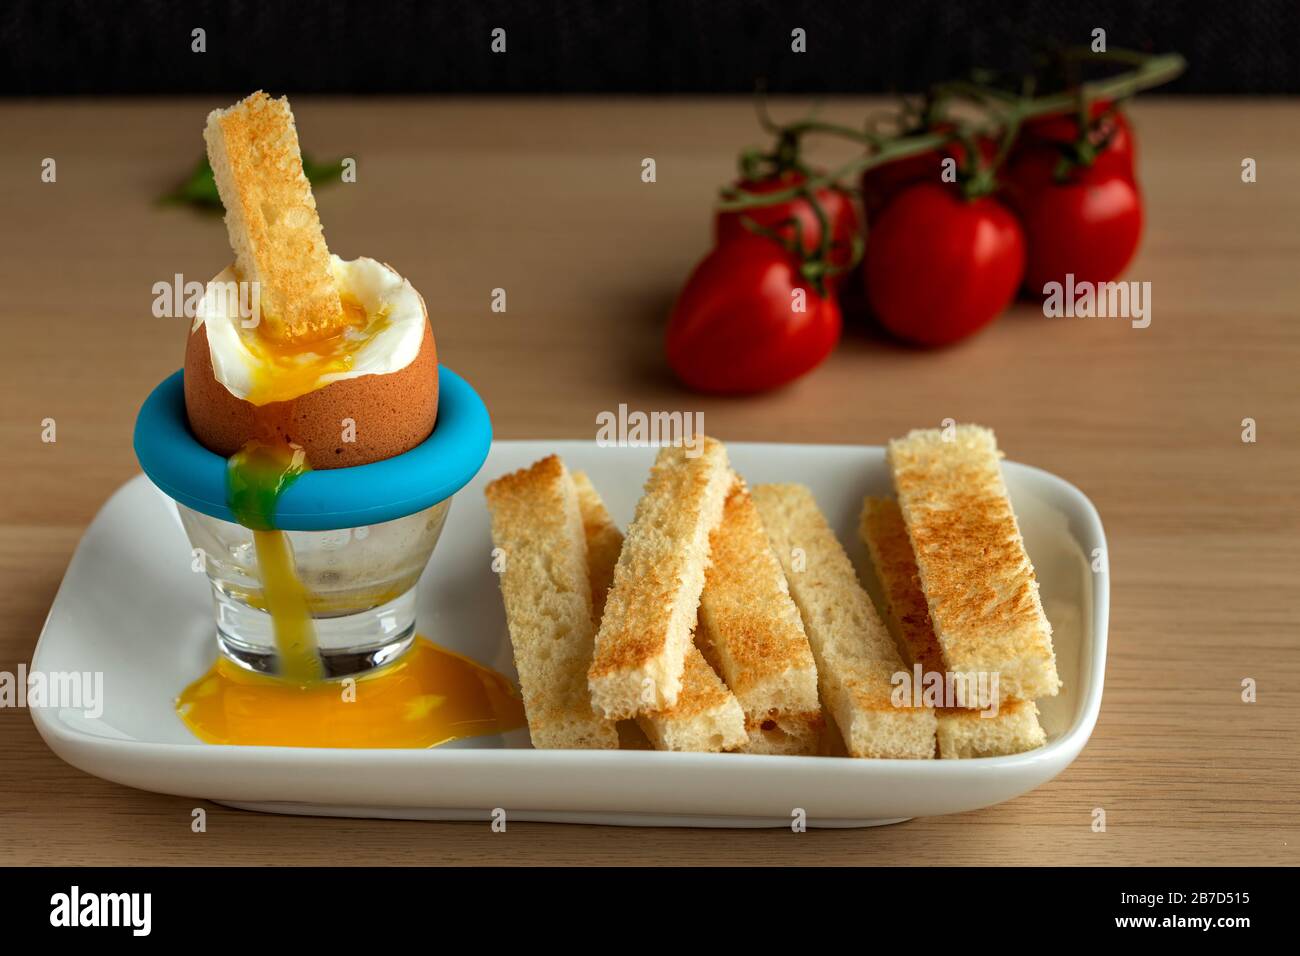 Brakfast food - boiled egg with toast on plate Stock Photo